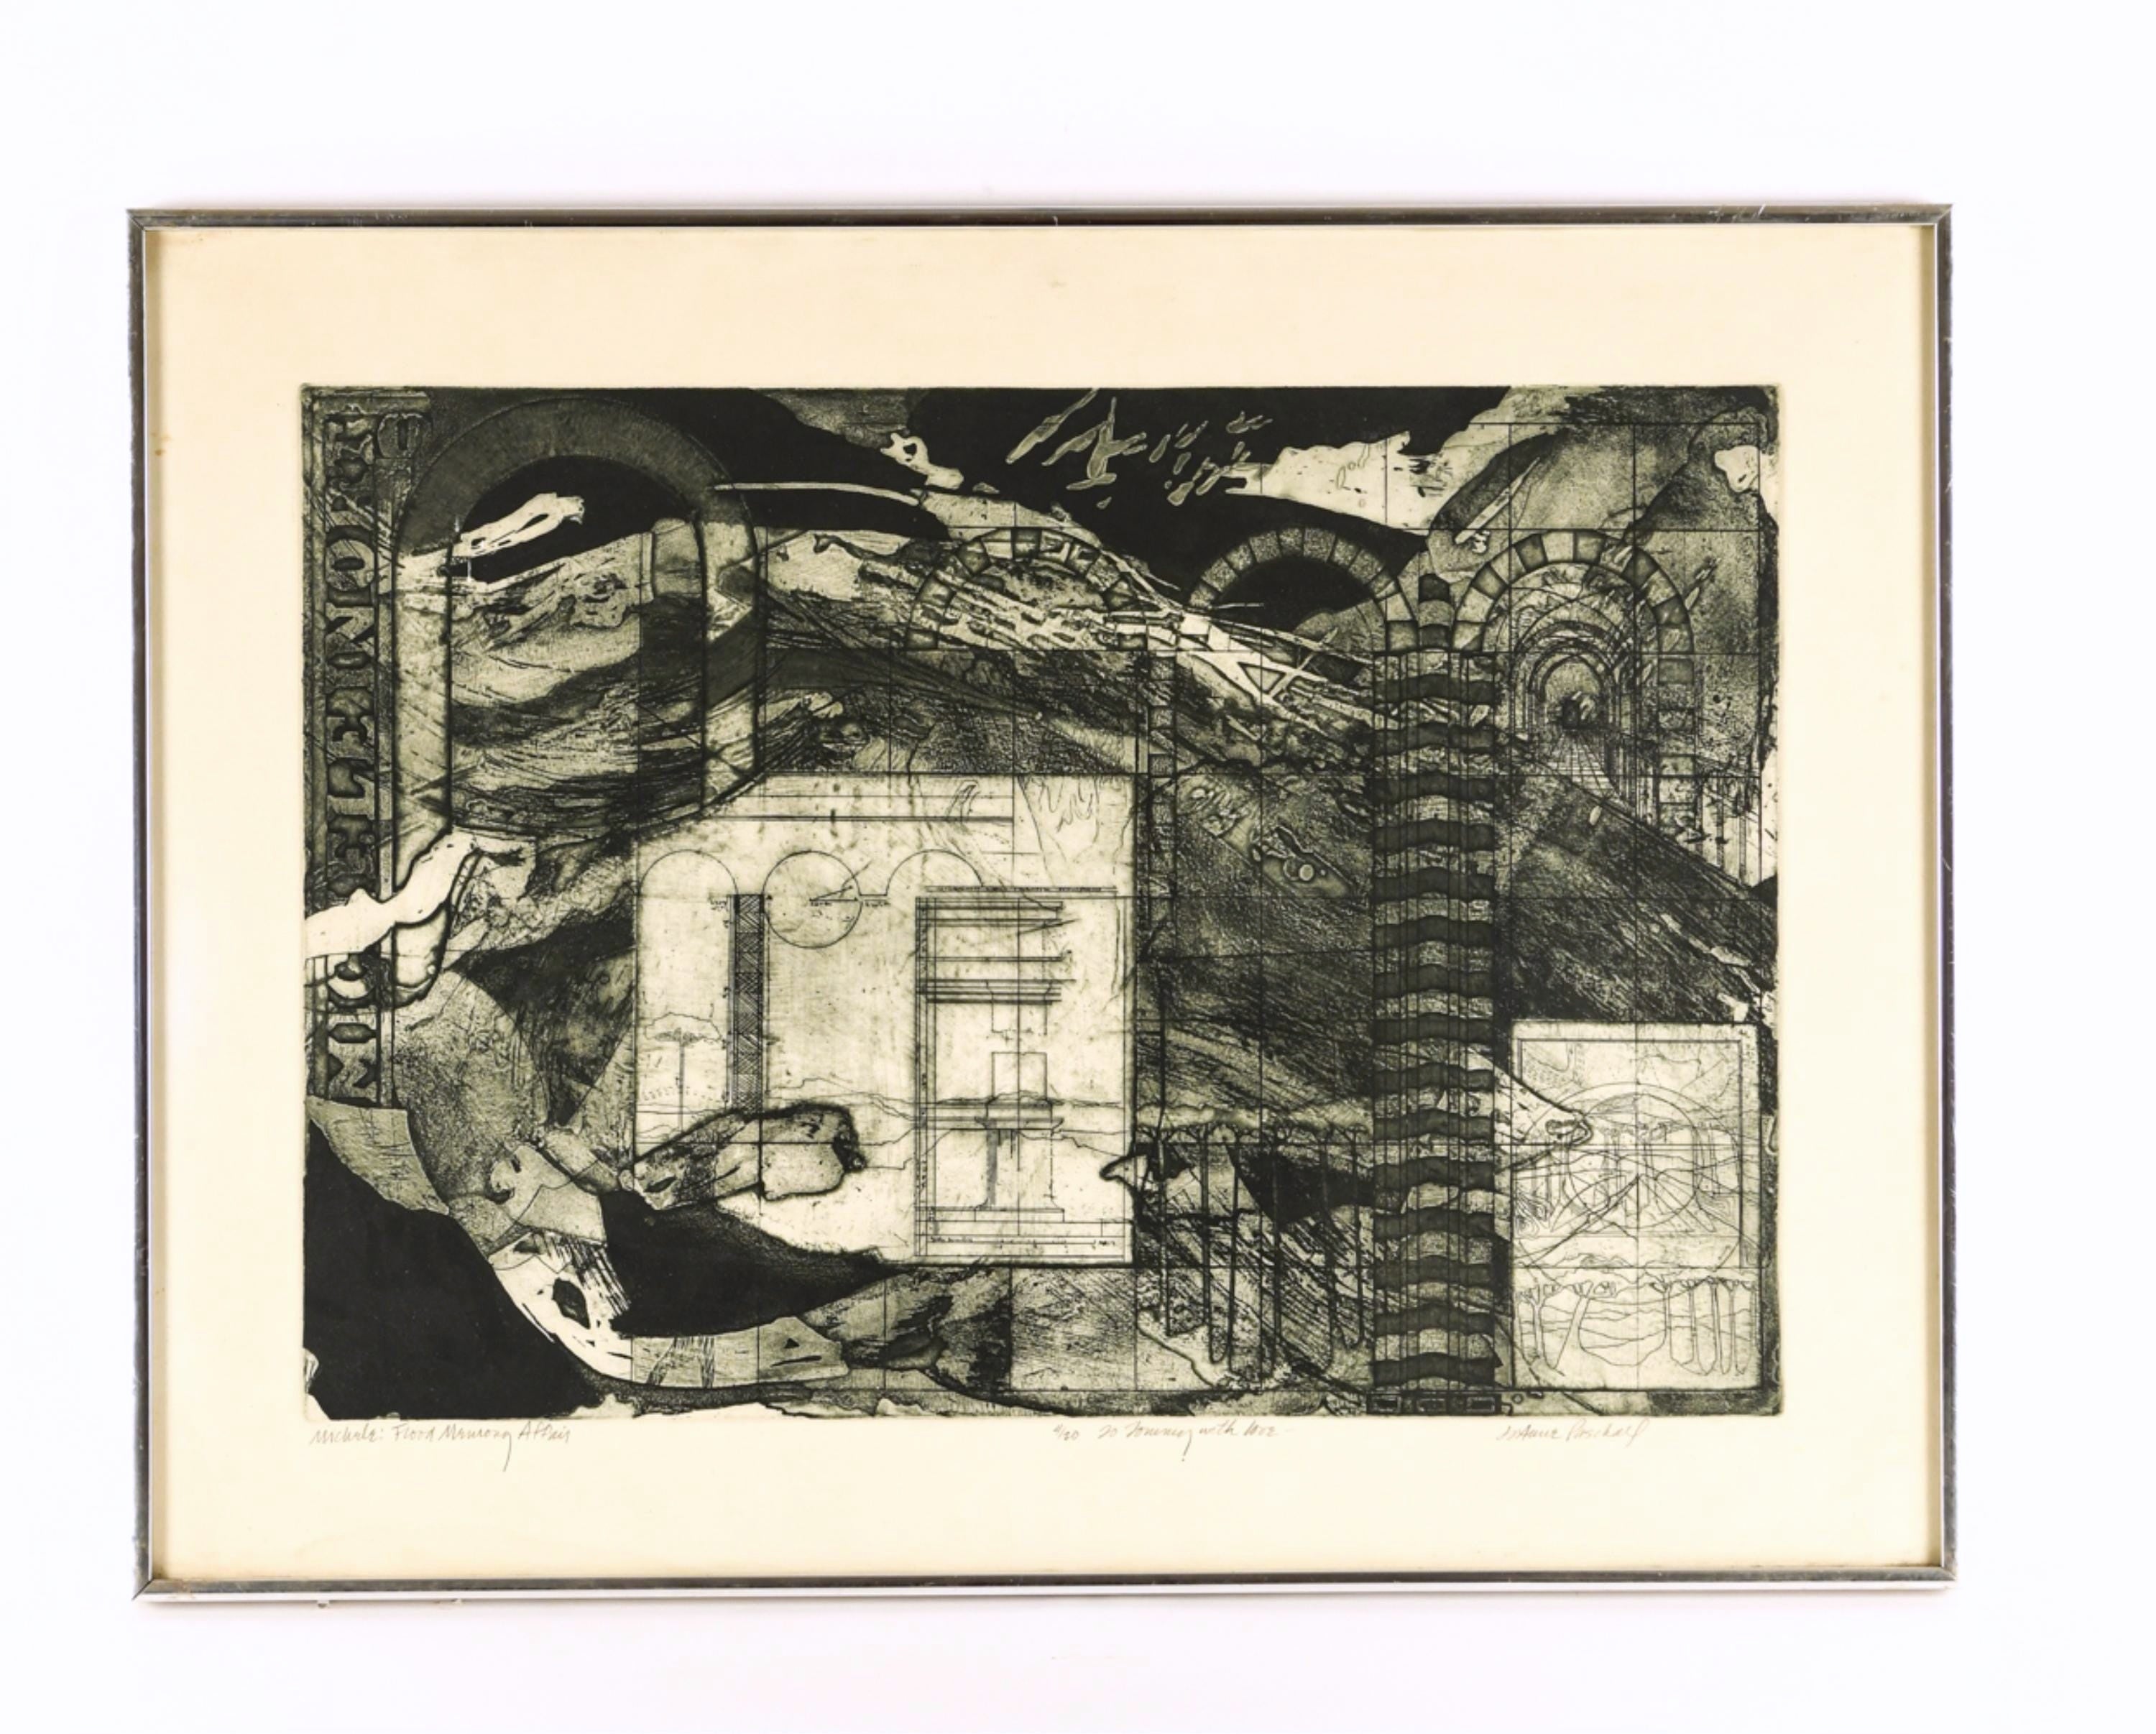 ‘MICHELE: FLOOD MEMORY AFFAIR’ LITHOGRAPH BY JOANNE PASCHALL (1970s)